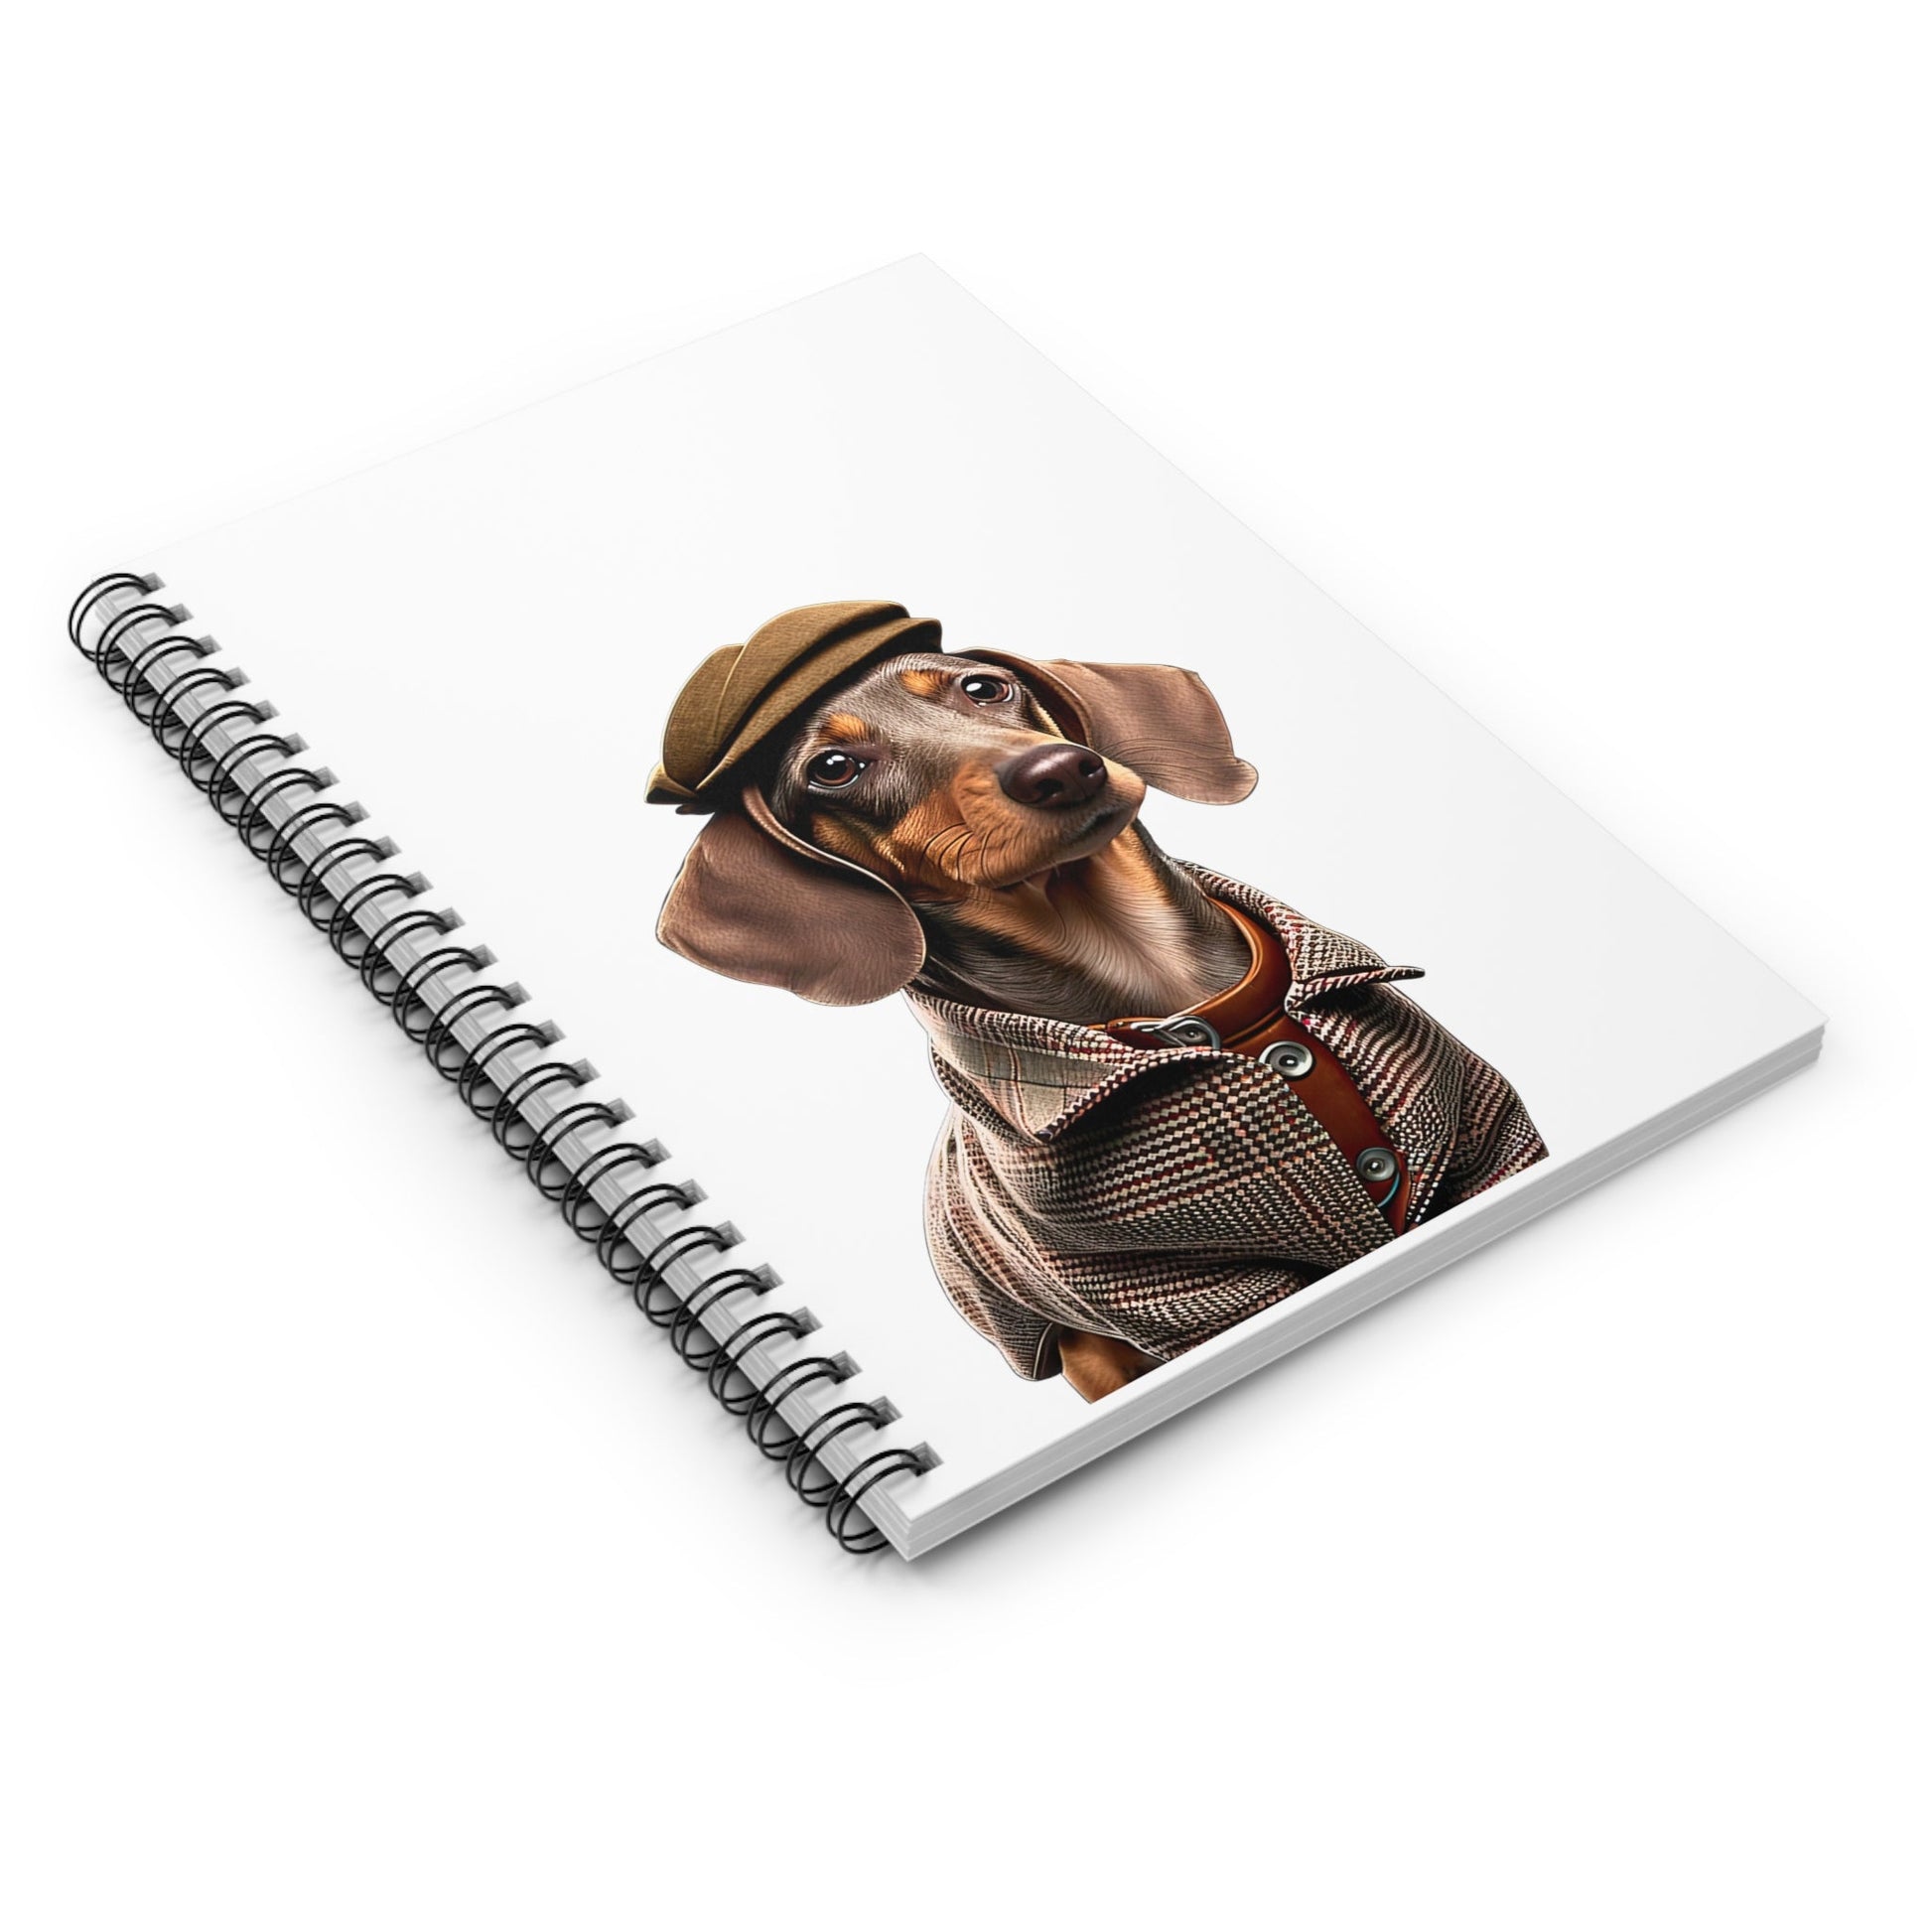 DONNY : Spiral Notebook - Ruled Line - Shaggy Chic